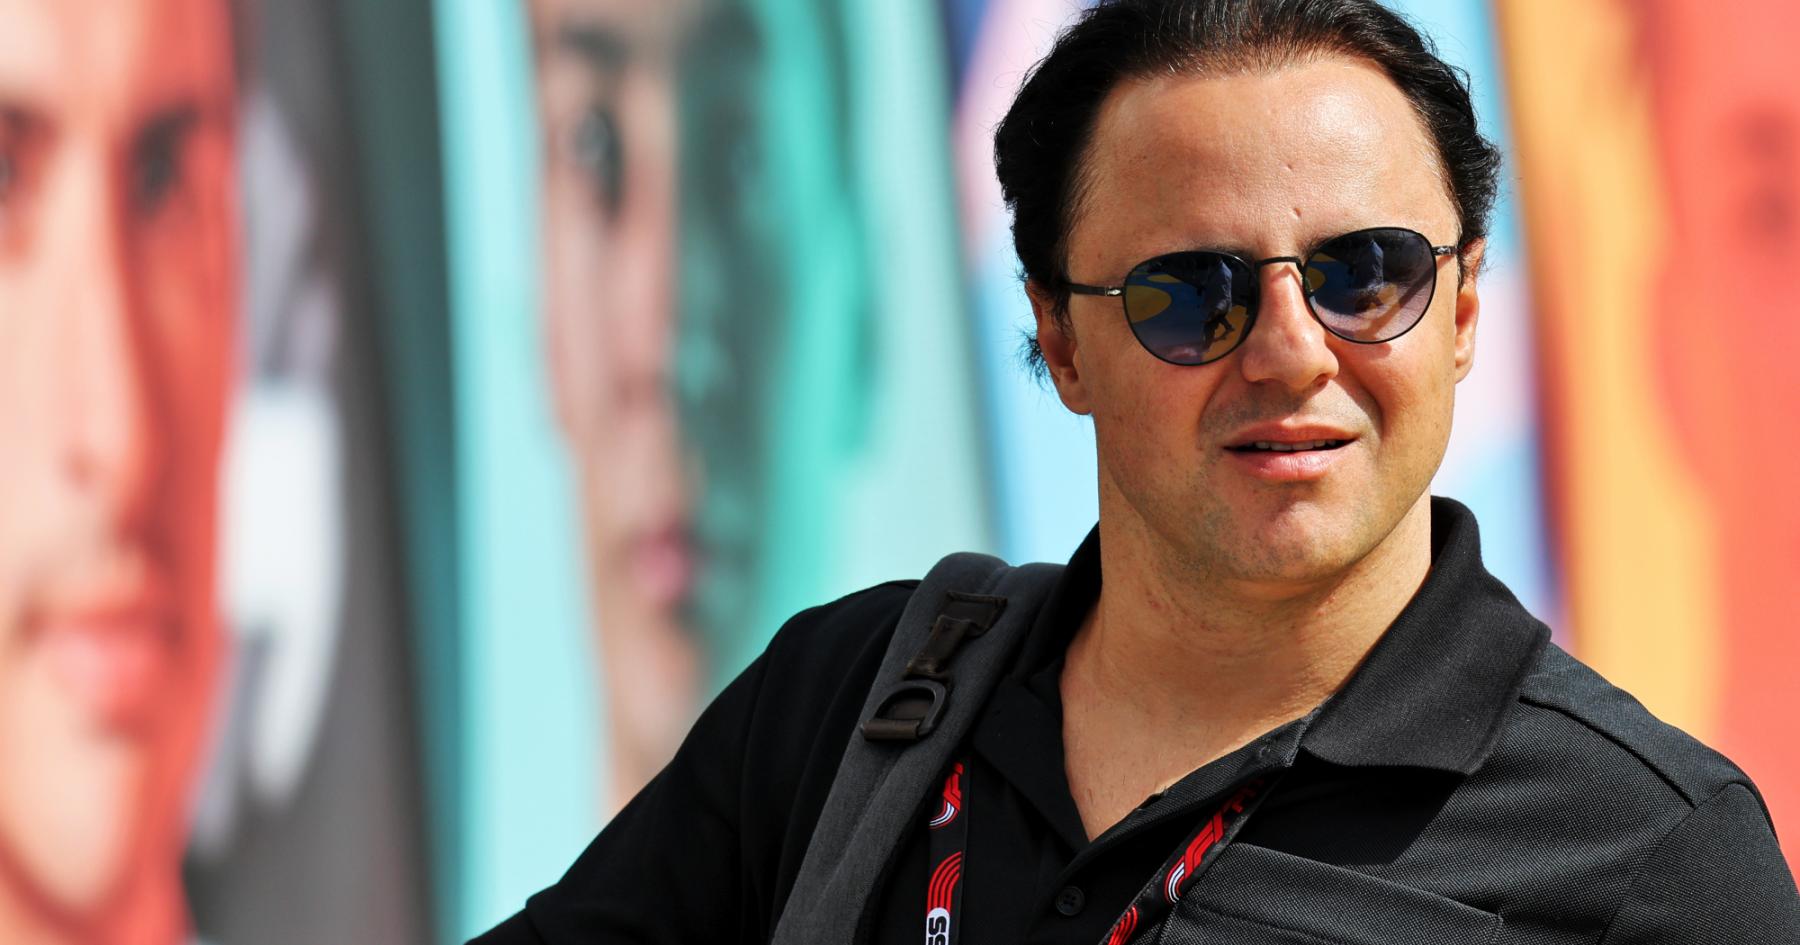 Driving Against the Odds: Felipe Massa Makes Bold Move to Join São Paulo E-Prix Amid Legal Battle with FIA